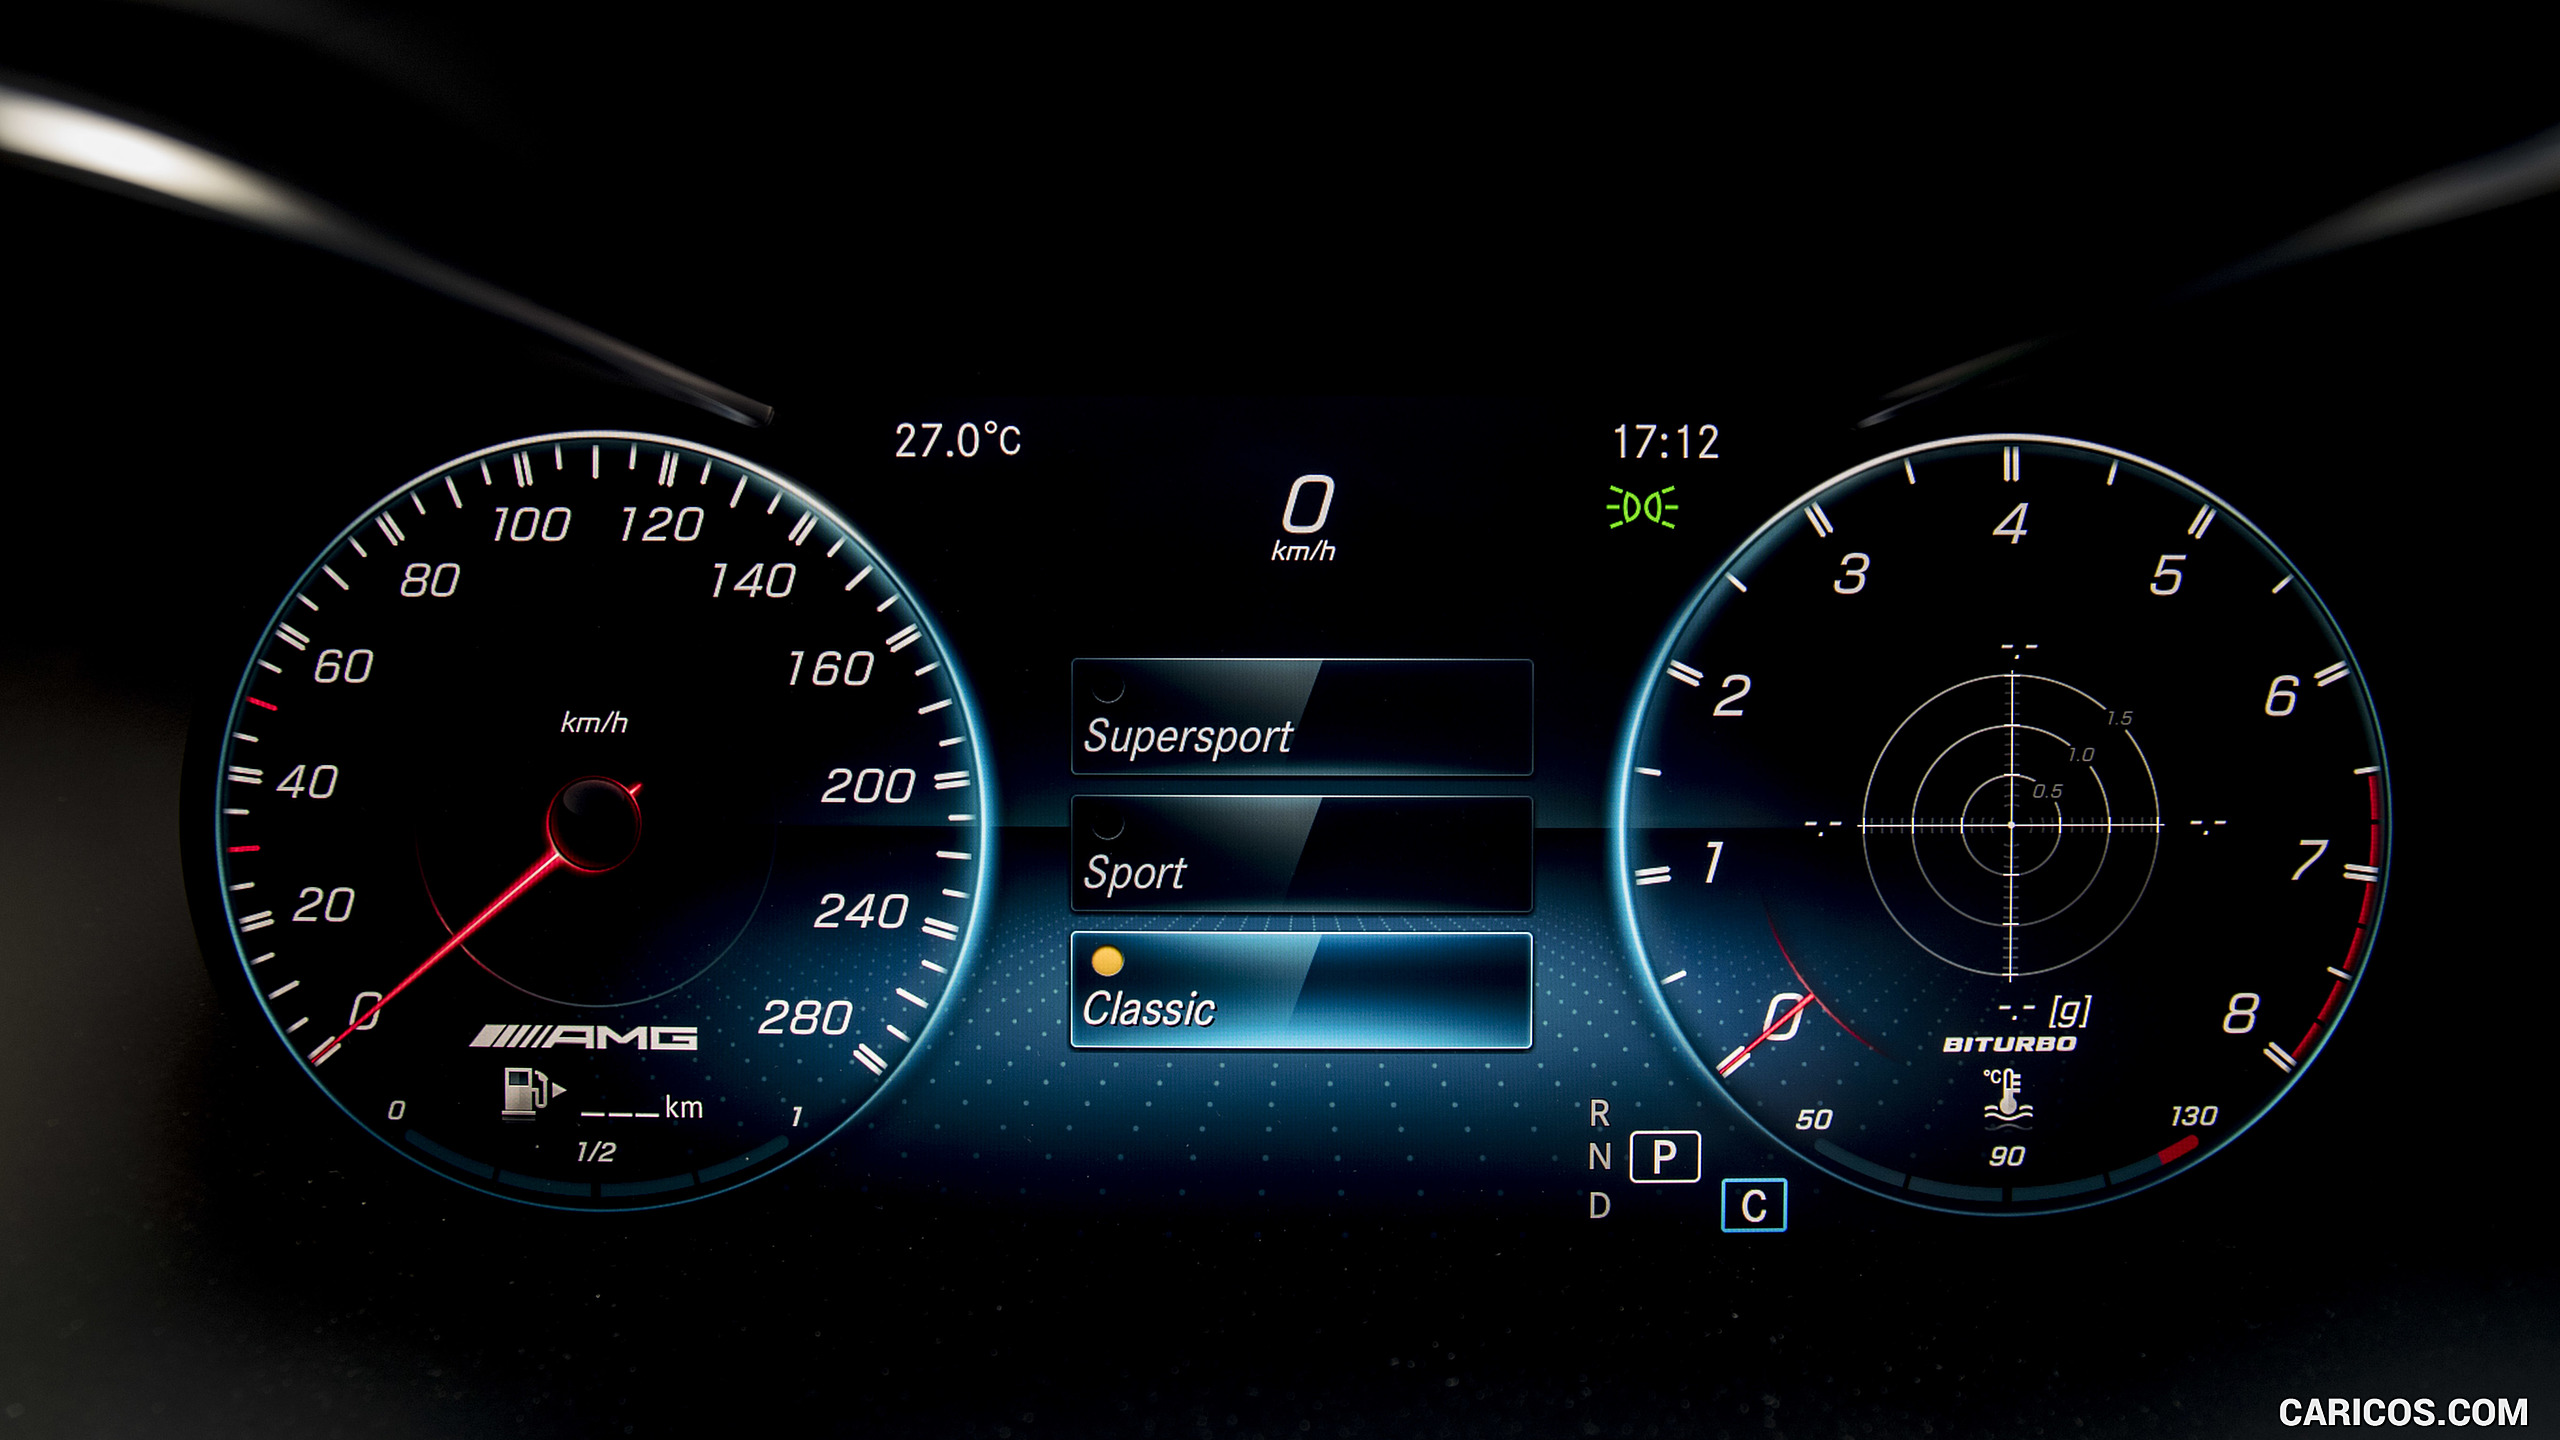 2019 Mercedes-AMG C43 4MATIC Coupe - Digital Instrument Cluster, #104 of 184